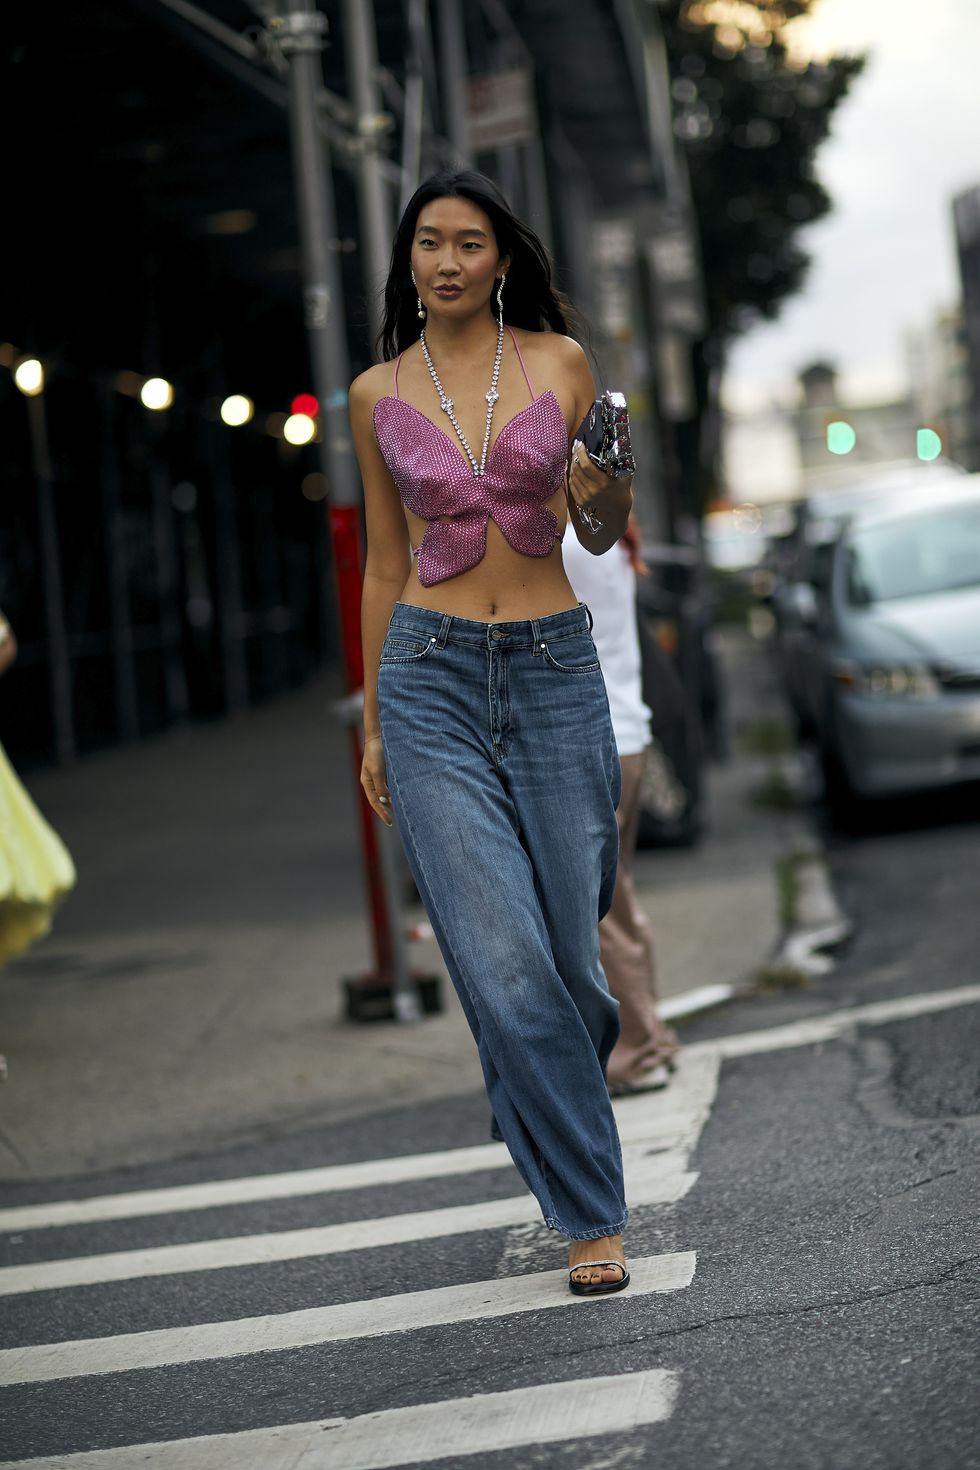 Model on jean looks really good on NYC streets